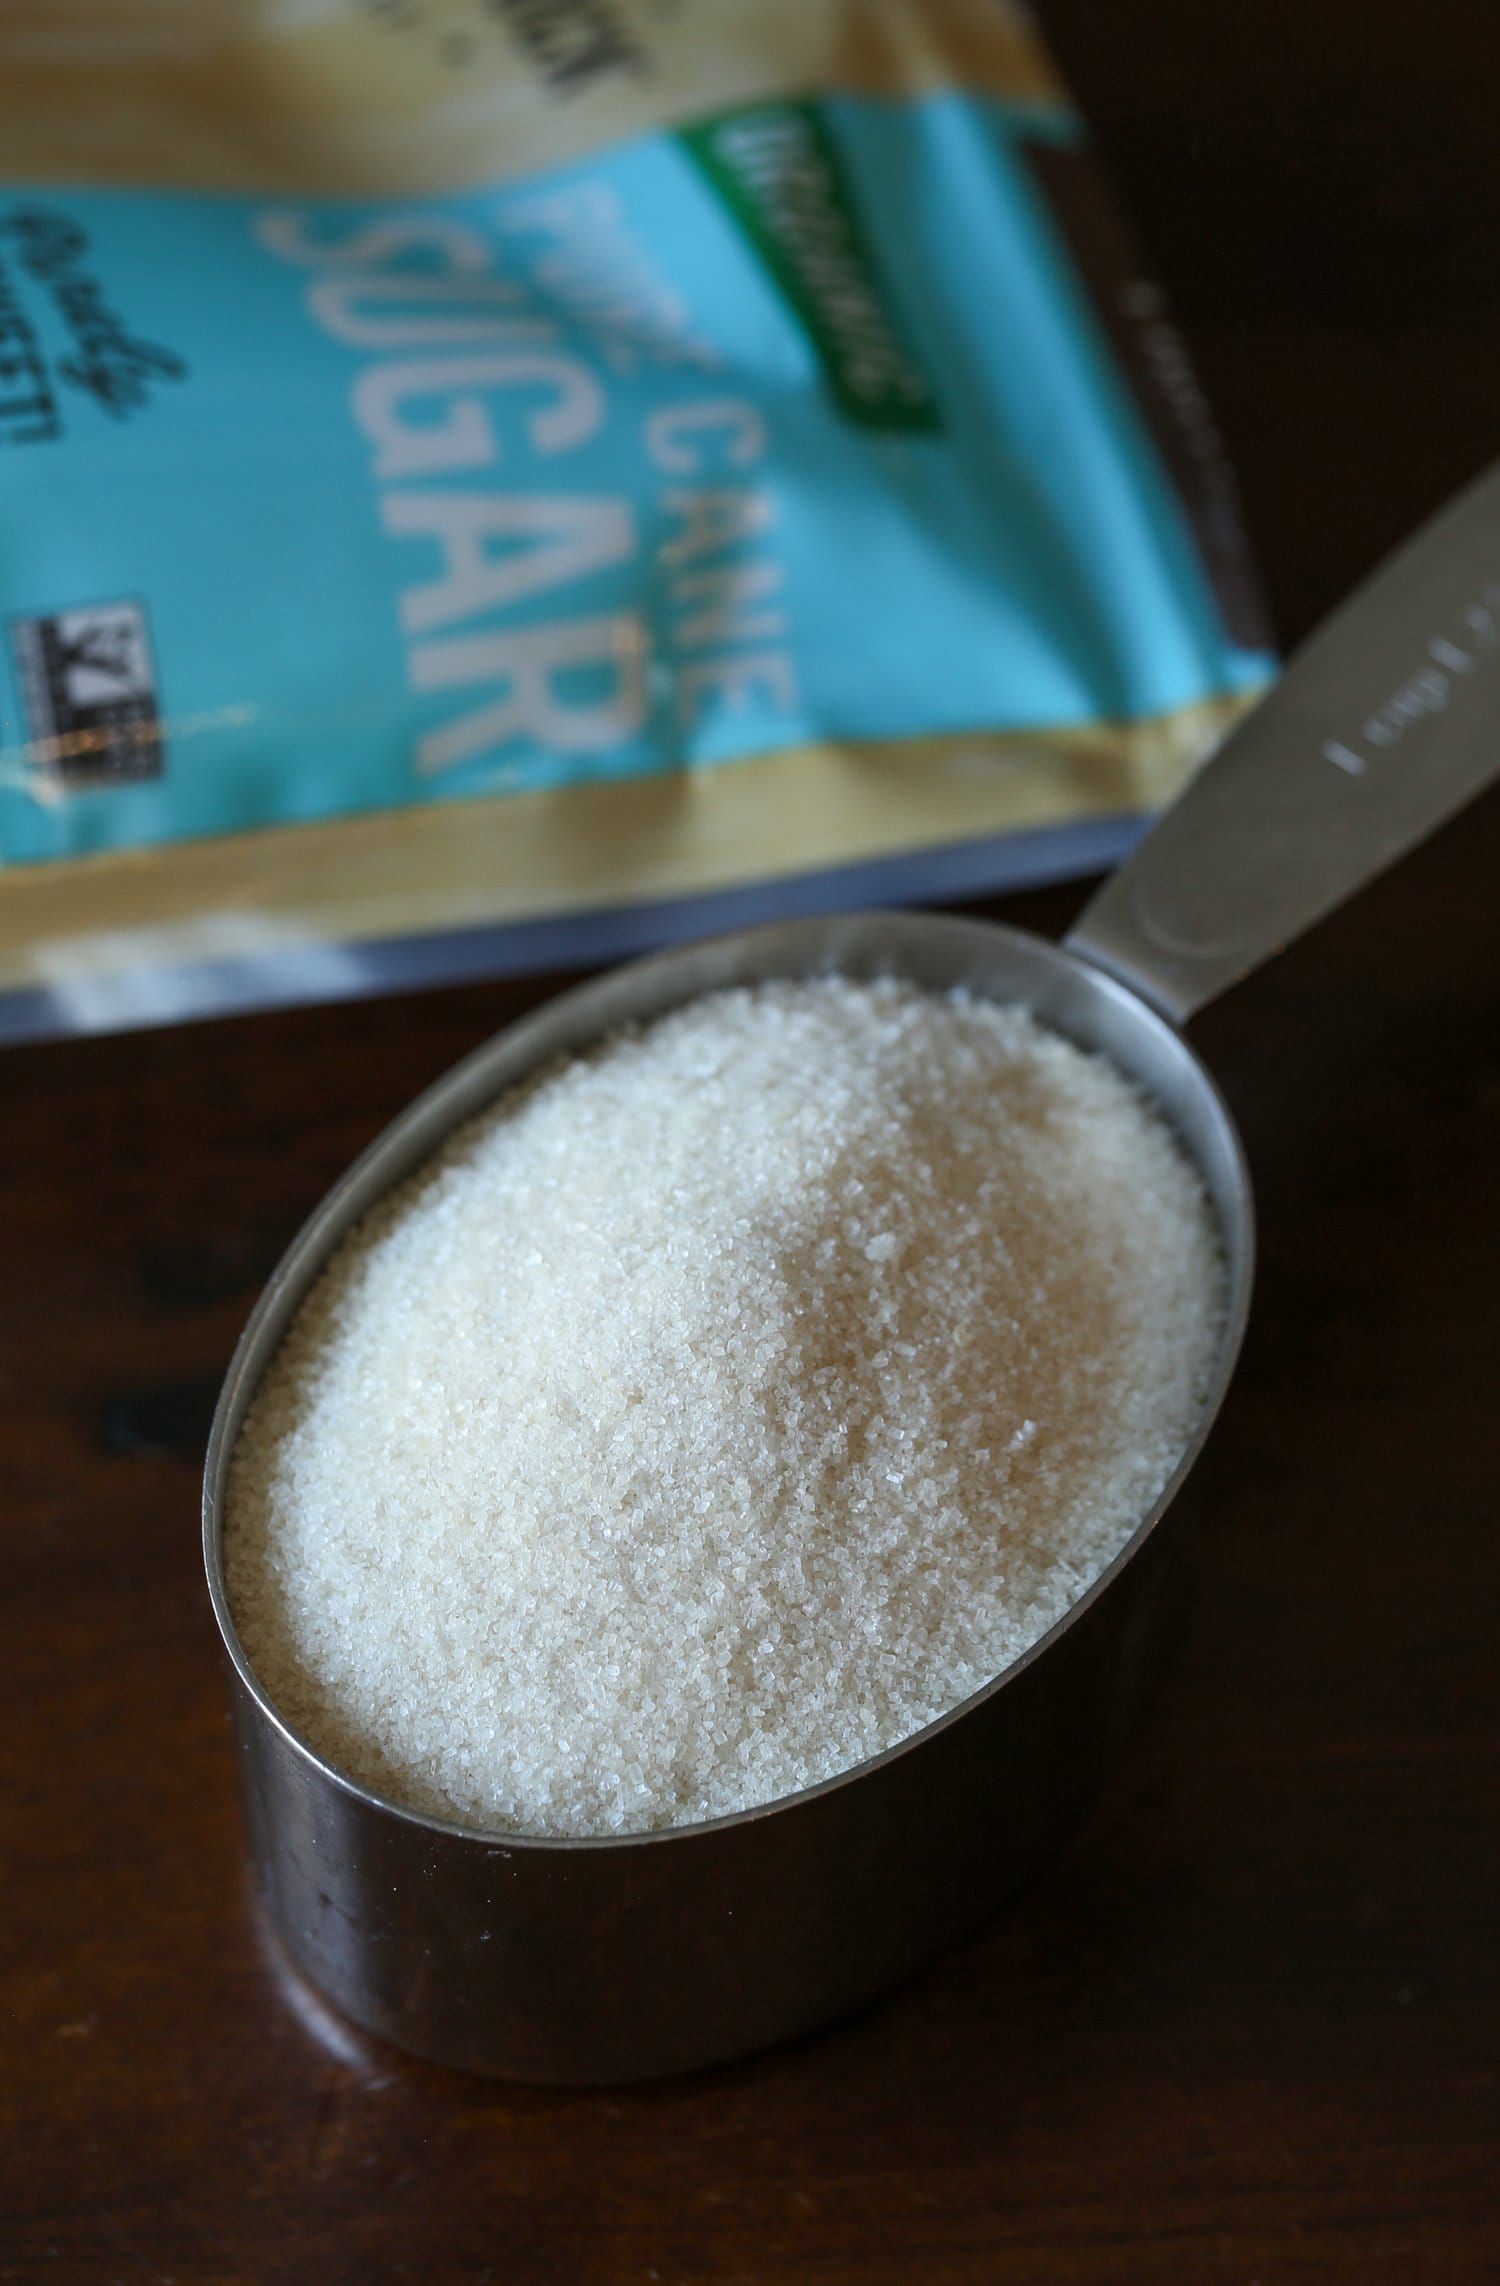 A measuring cup filled with cane sugar, which will be combined with salt for the coating.